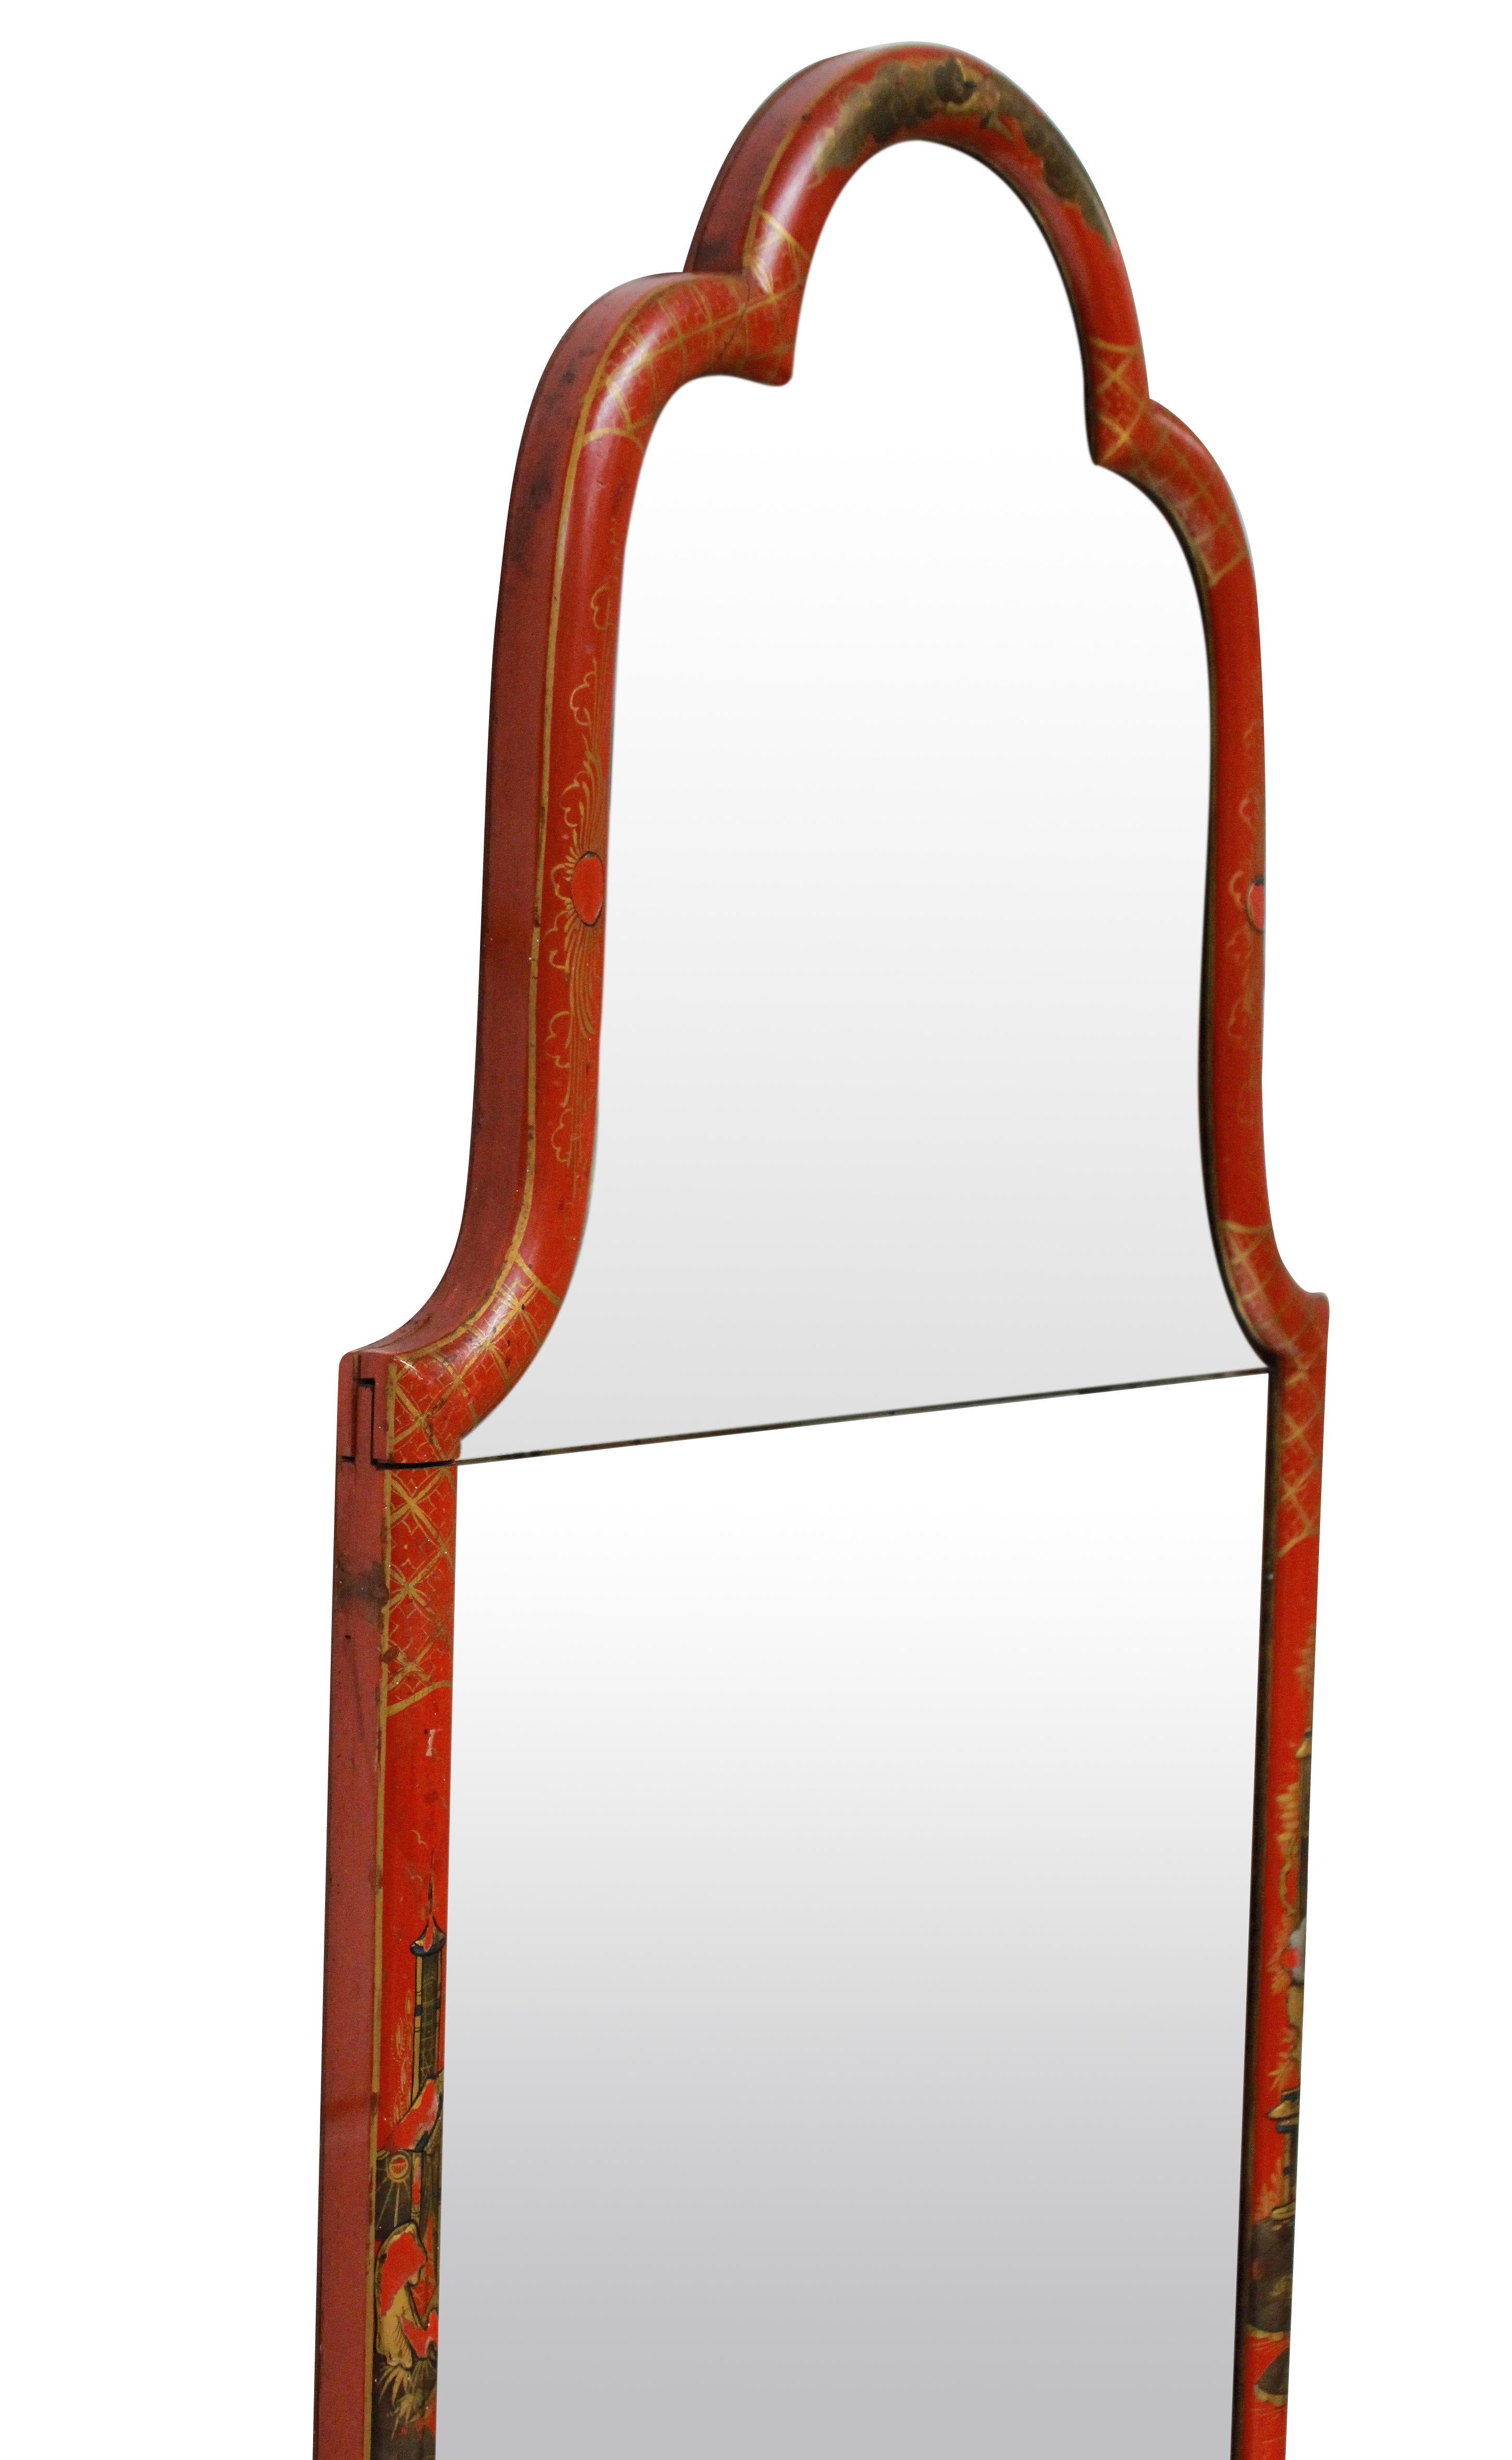 A fine English Queen Anne style Japanned mirror, in red lacquer, with it's original bevelled split mirror plate.

  